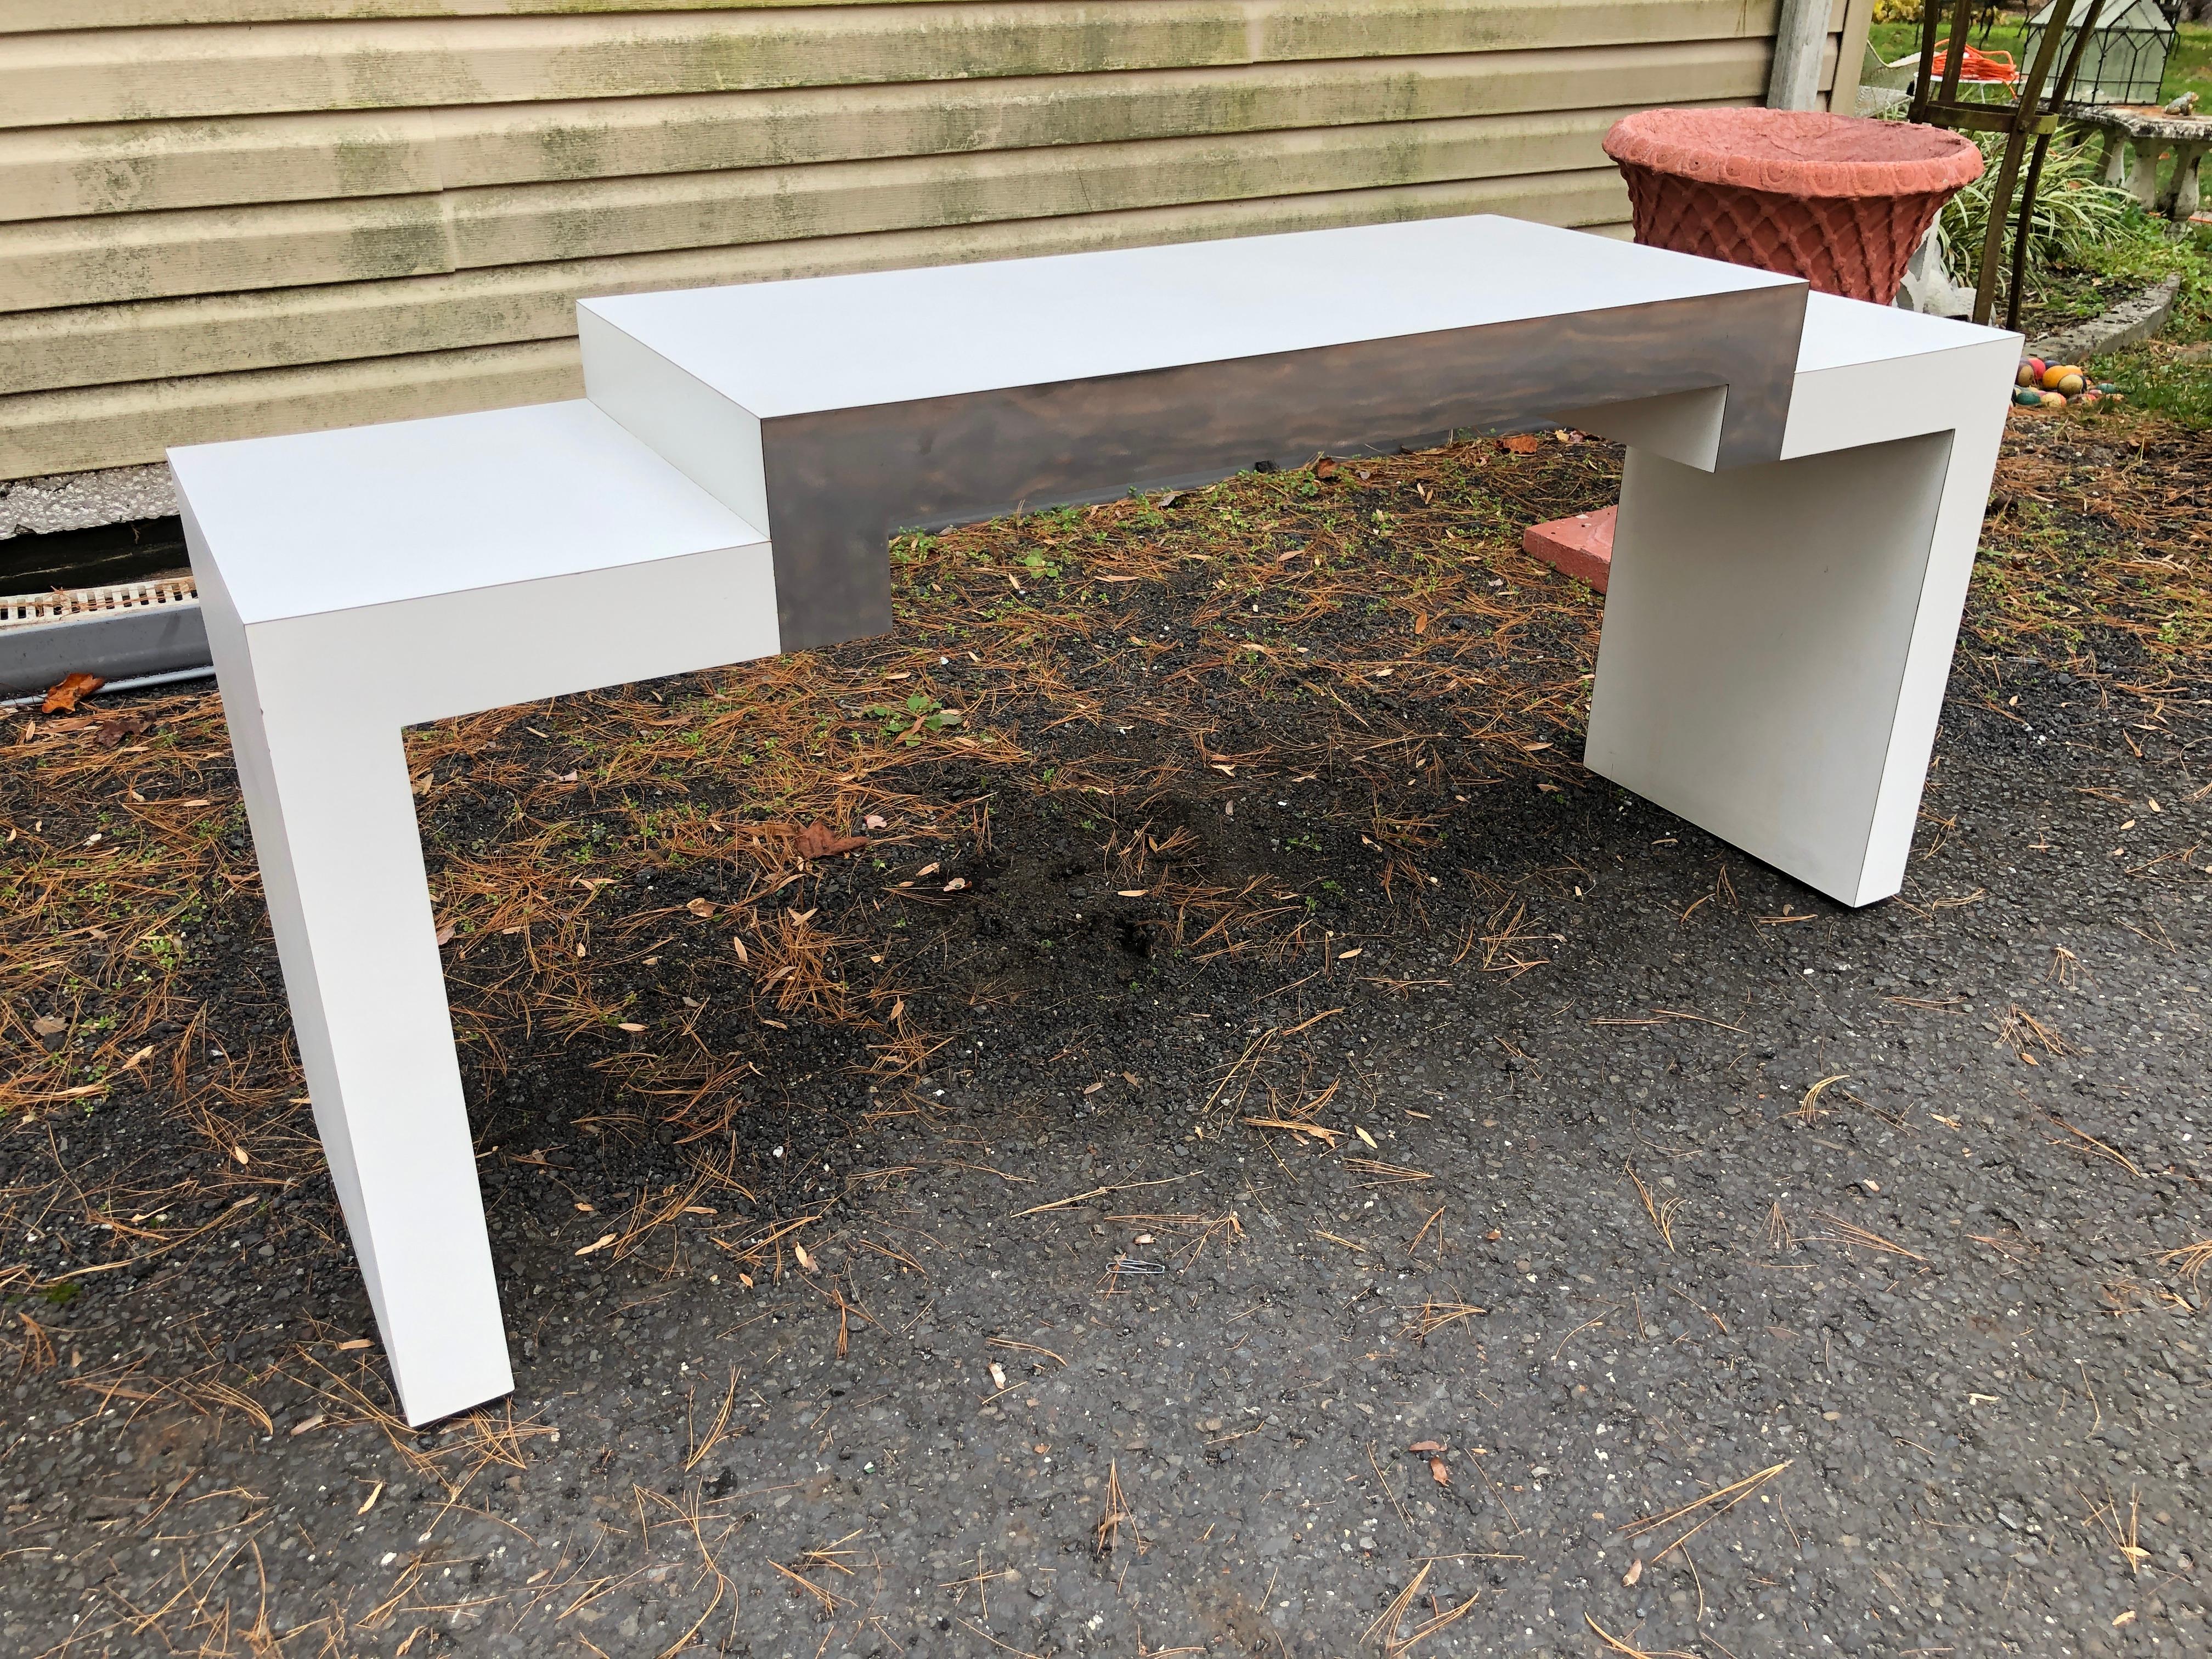 Fun Post-modern geometric chrome and white laminate console table.  This table is in nice vintage condition-top is bright white and clean.  It measures 26